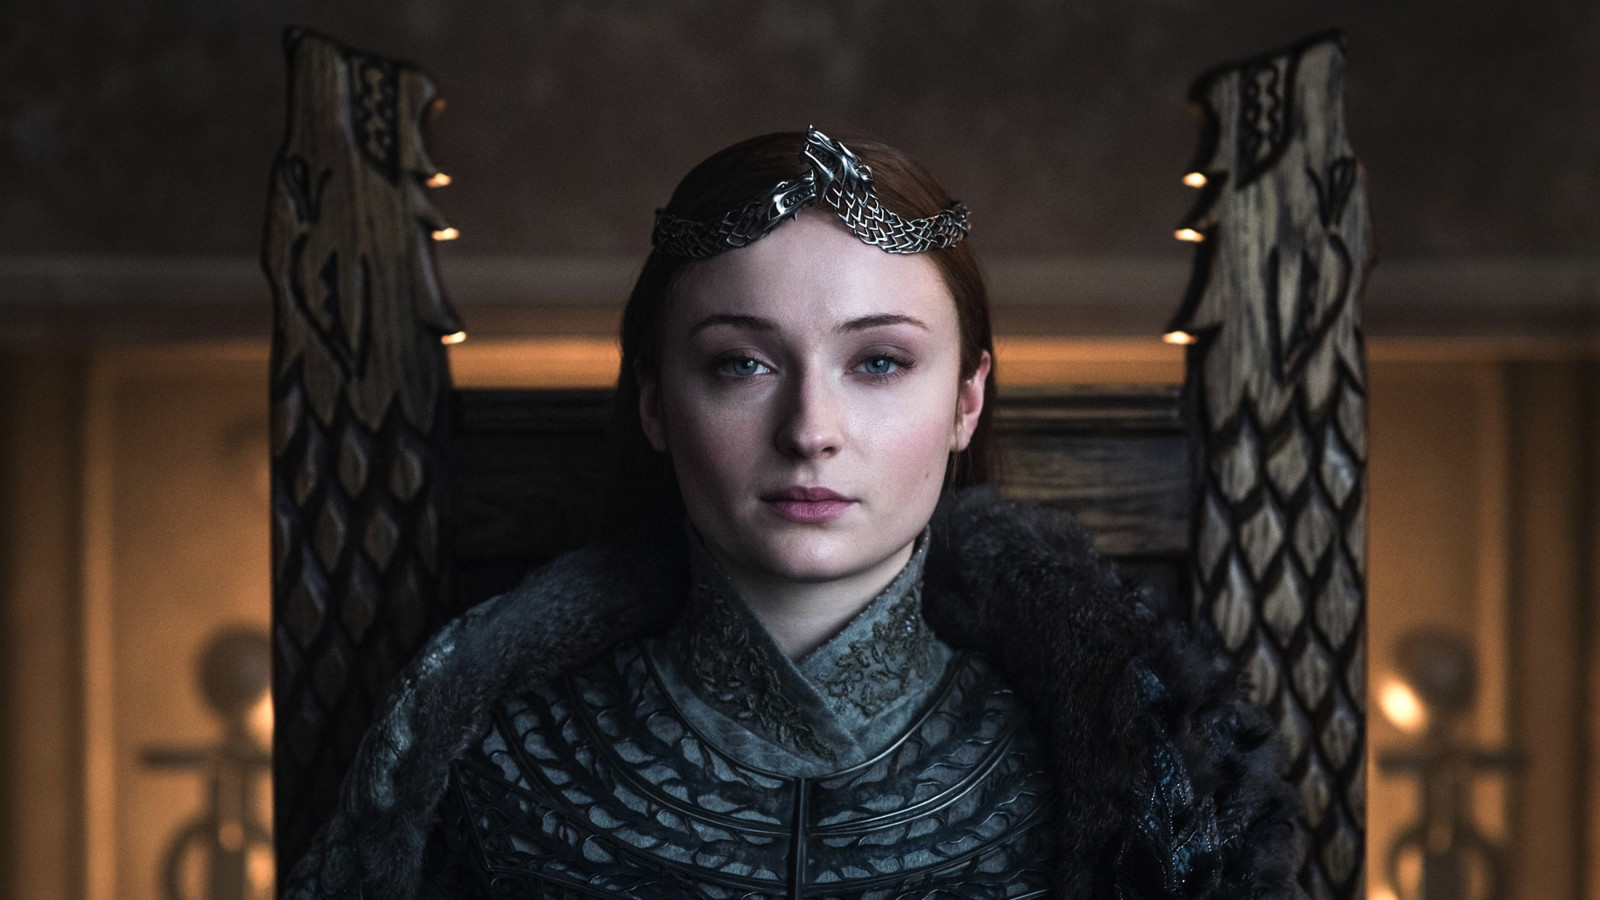 Sansa Stark is christened as the Queen of the North in the finale of Game of Thrones